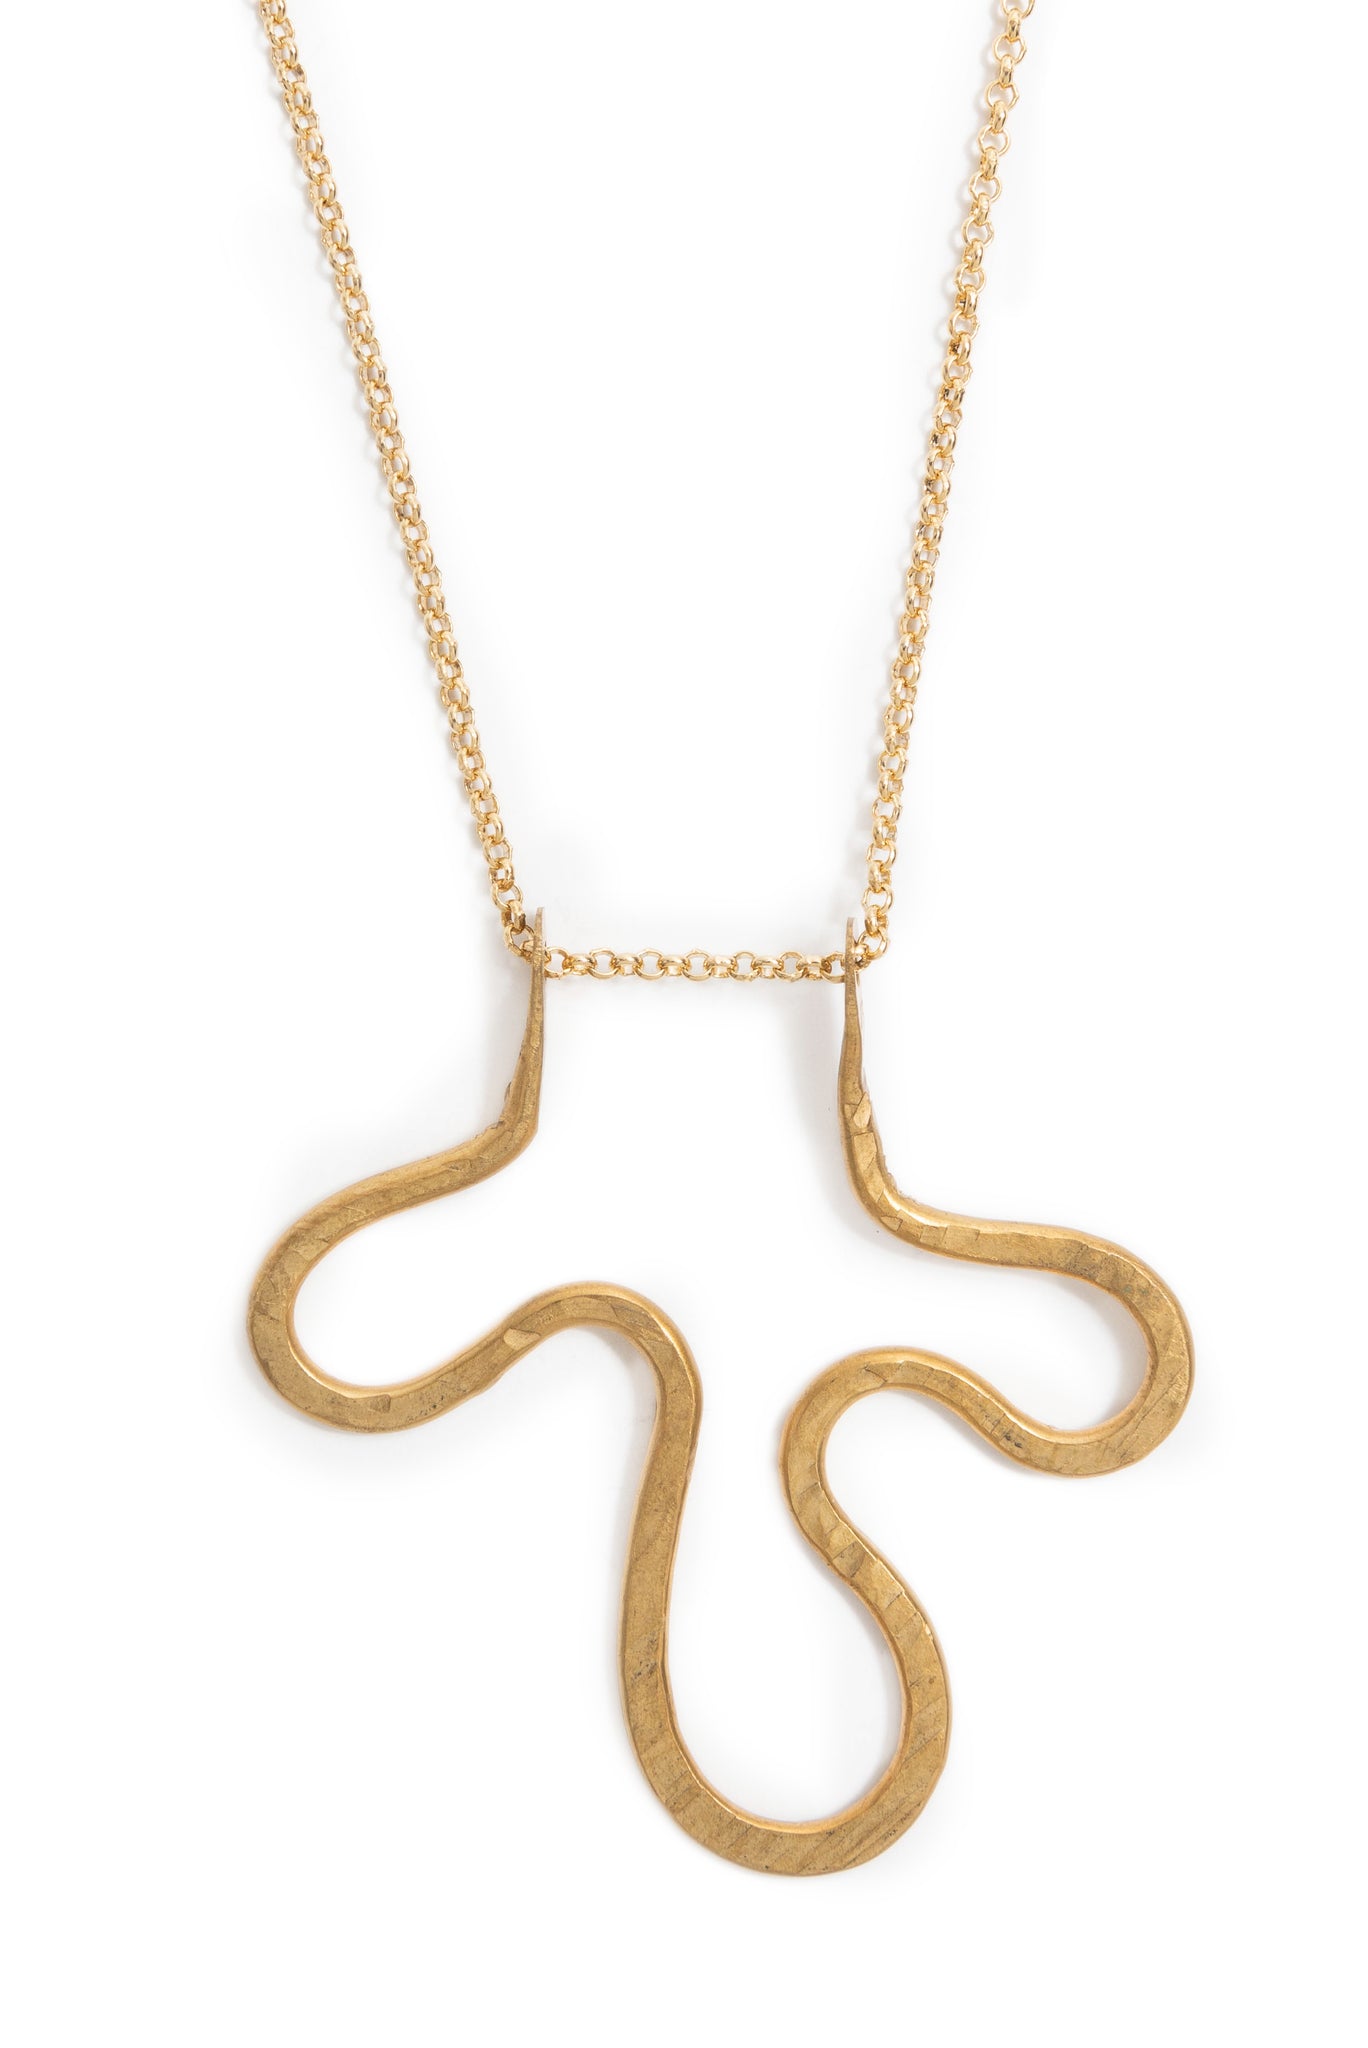 Pinched Squiggle on Gold Rolo Chain